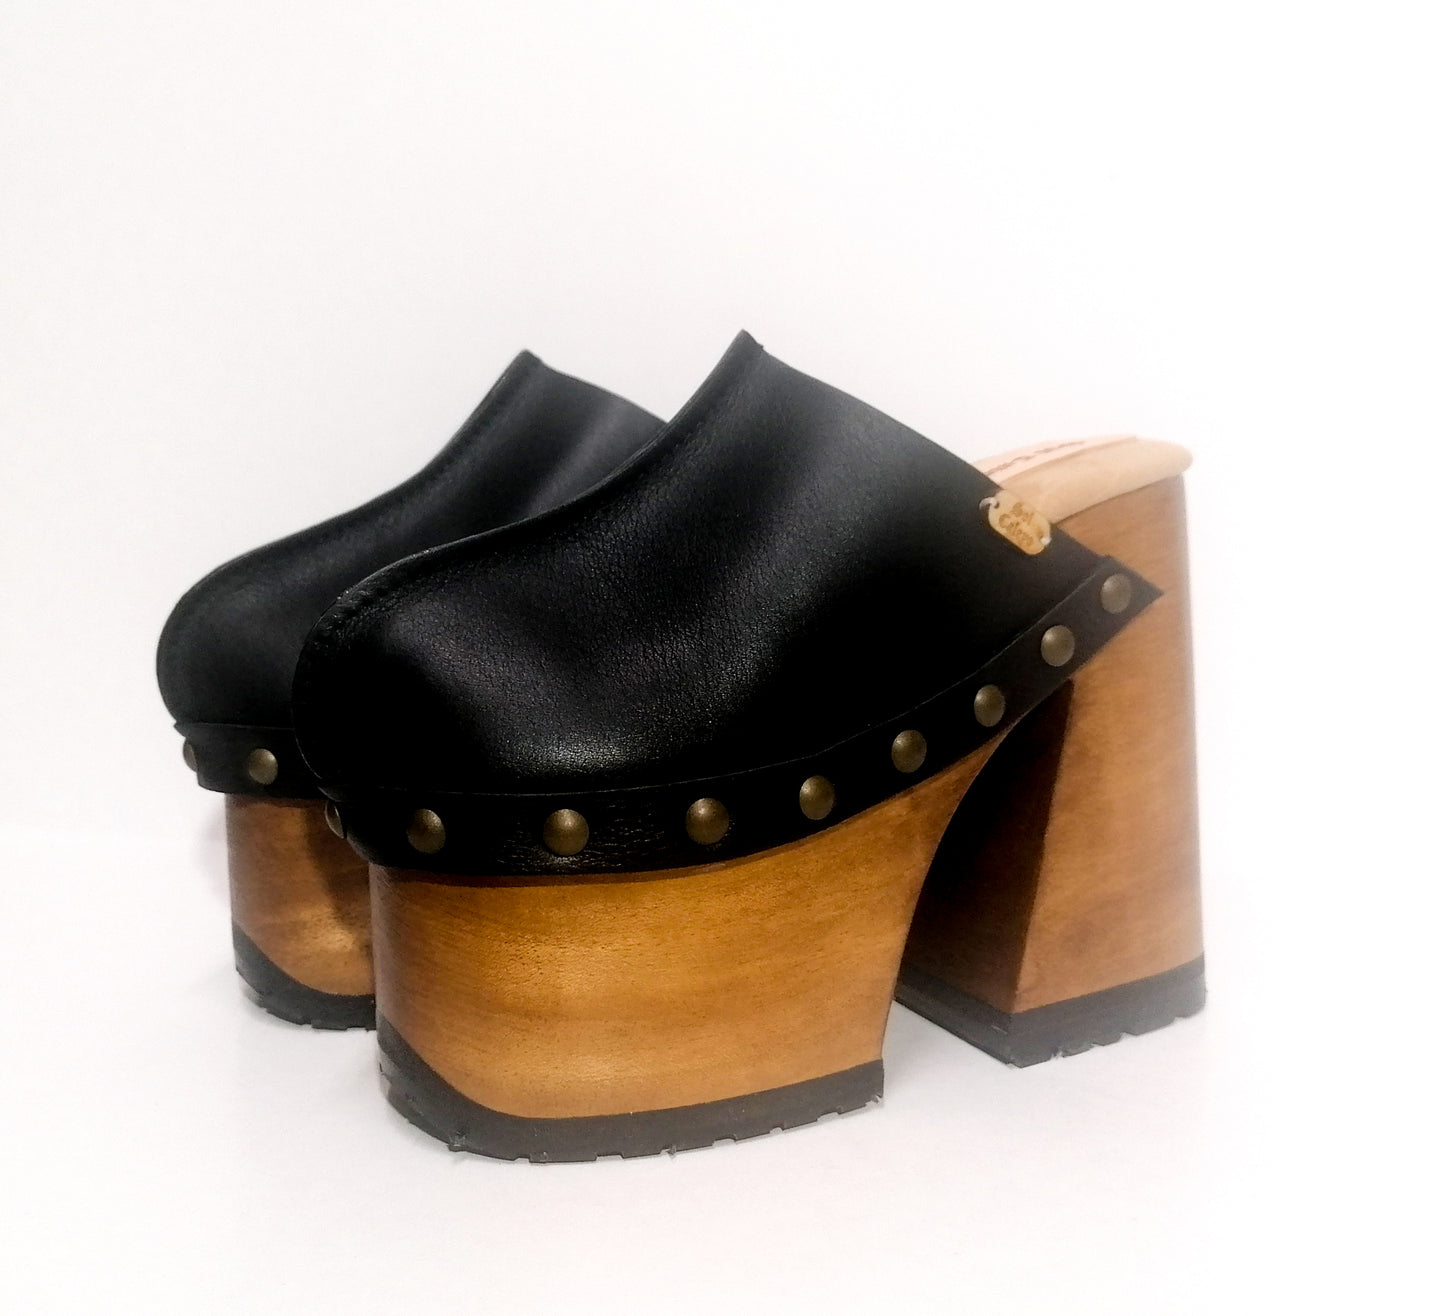 Black leather clog vintage style 70s. Leather clog with super high wooden heel. Vintage style wooden clog. Sizes 34 to 47. High quality handmade leather shoes by sol Caleyo. Sustainable fashion.